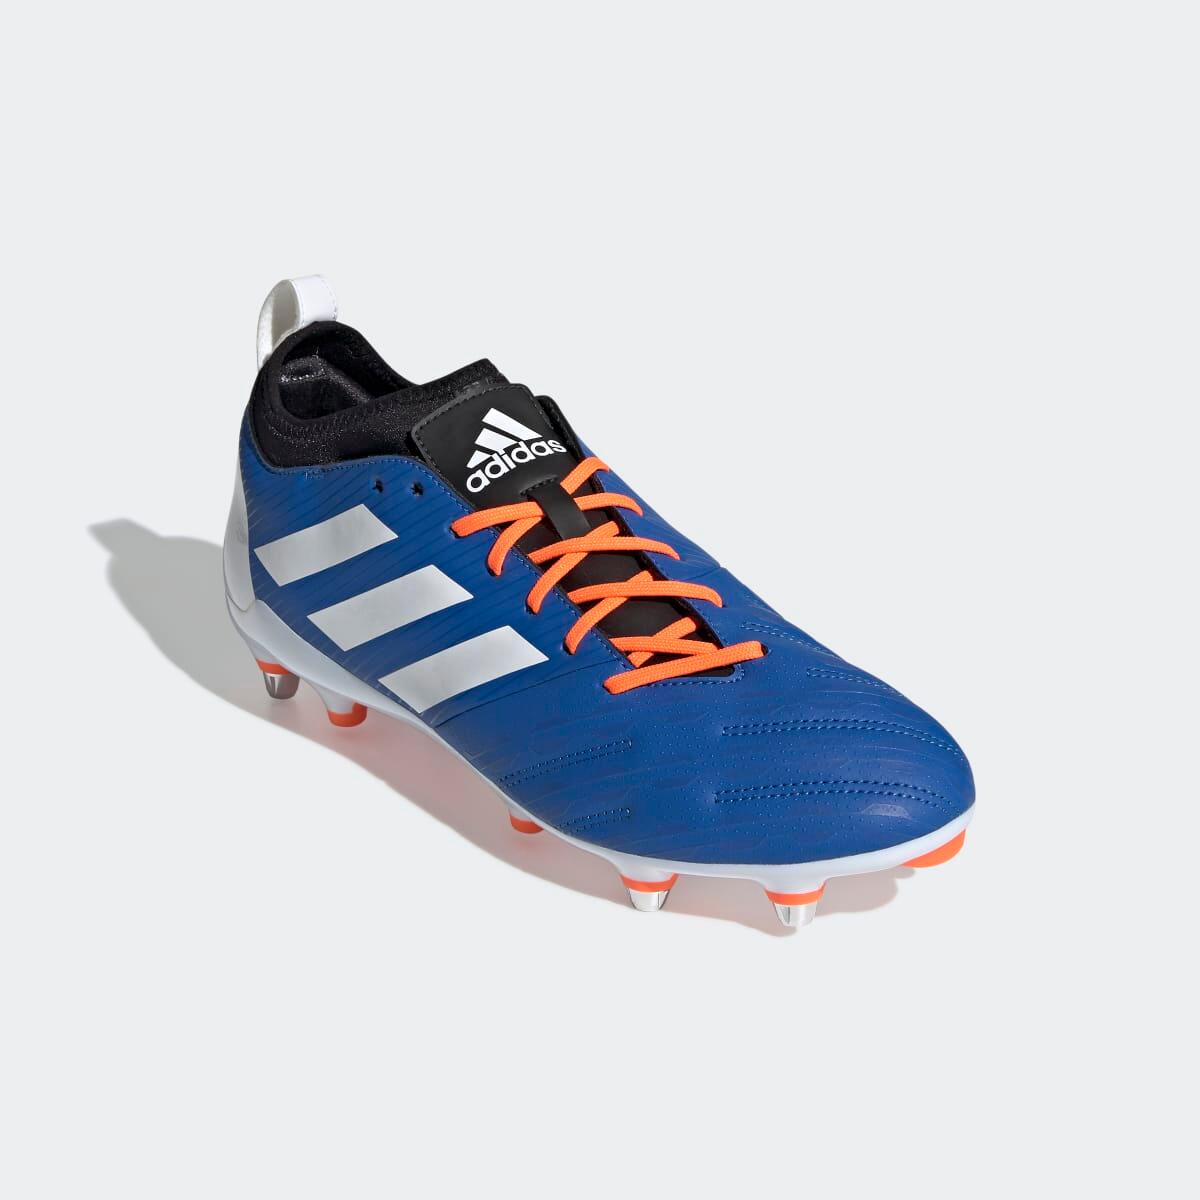 Adidas Malice Elite (Sg) Rugby Boots 5/7